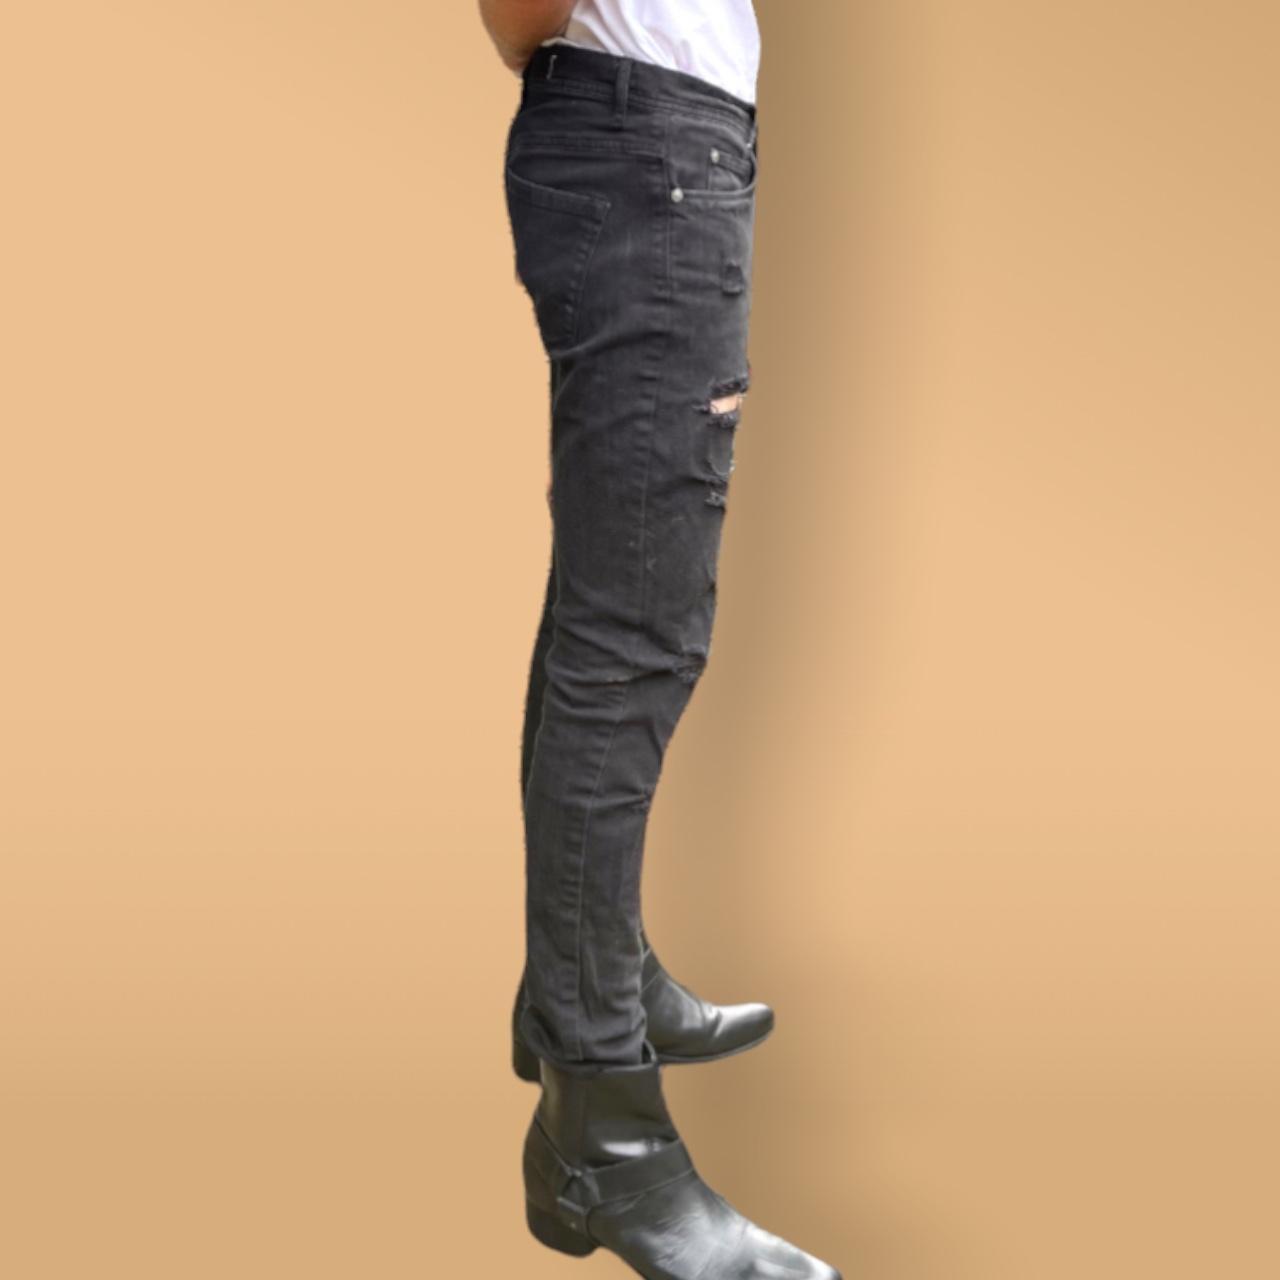 Product Image 3 - Mens Ripped Skinny Jeans
 